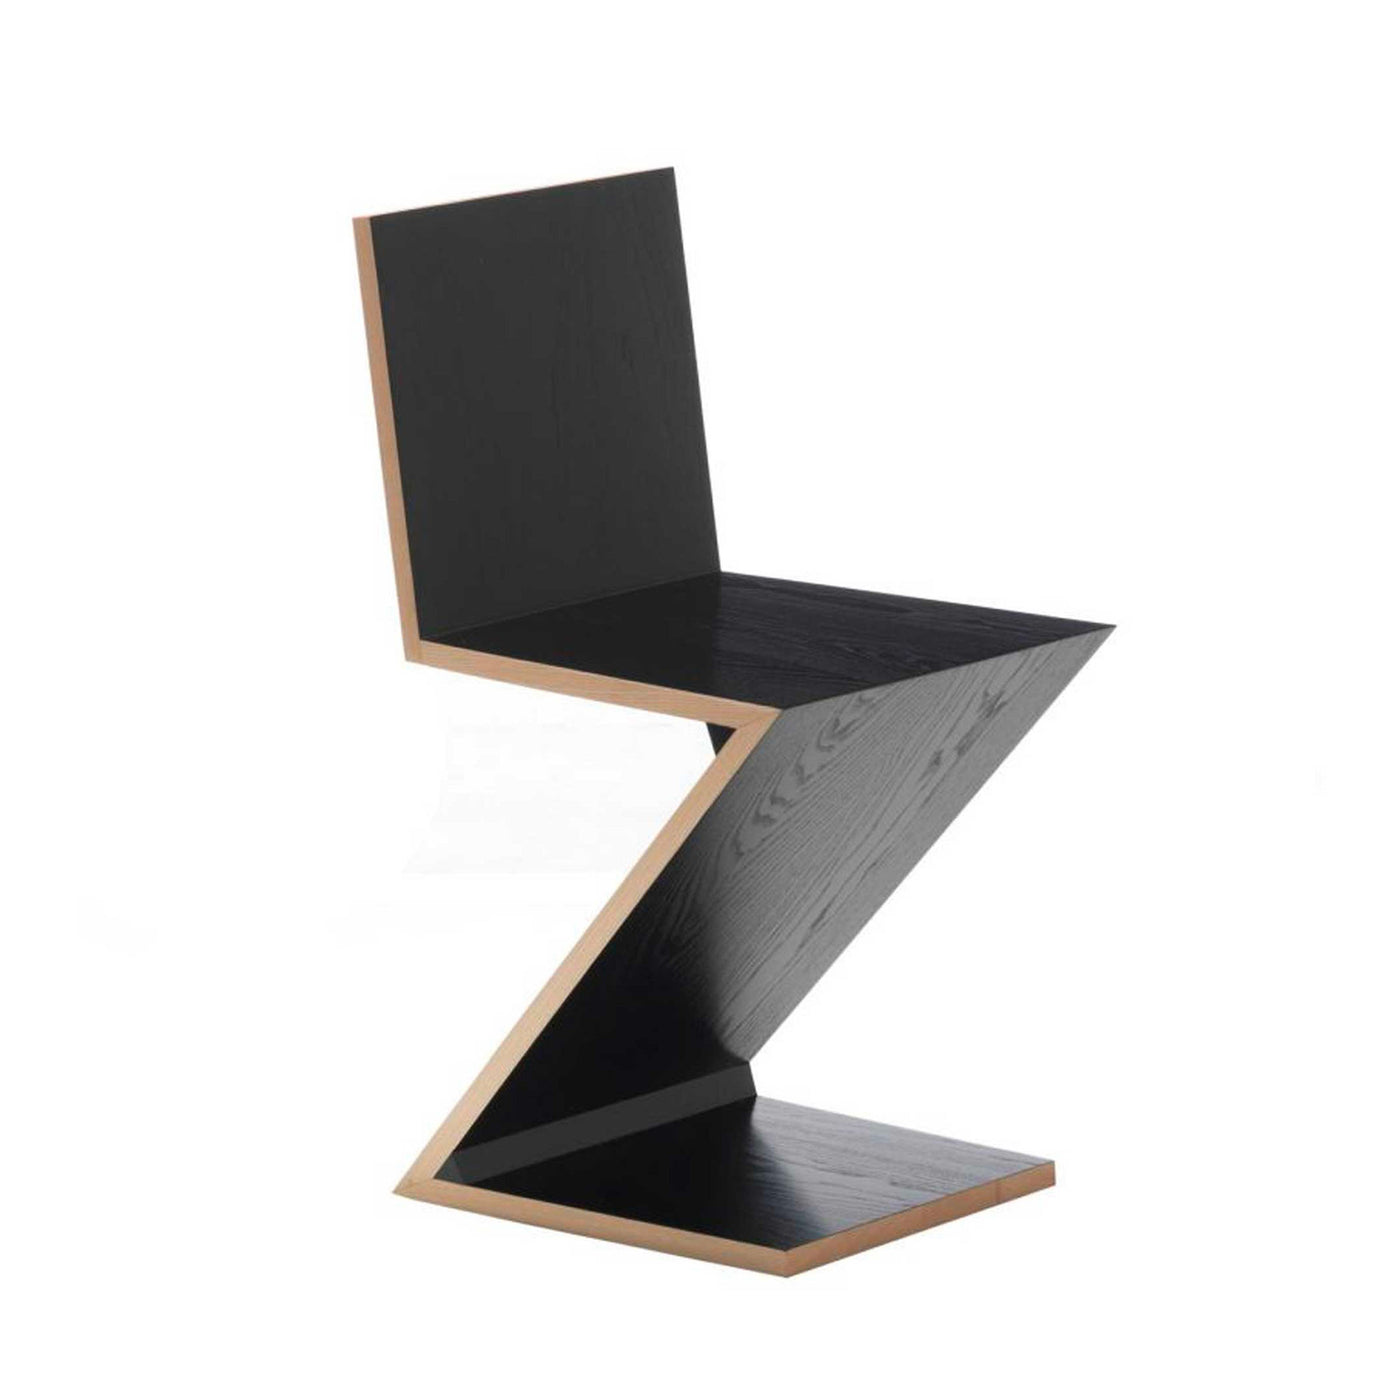 Cantiliver Wood Chair ZIG ZAG, designed by Gerrit T. Rietveld for Cassina 06